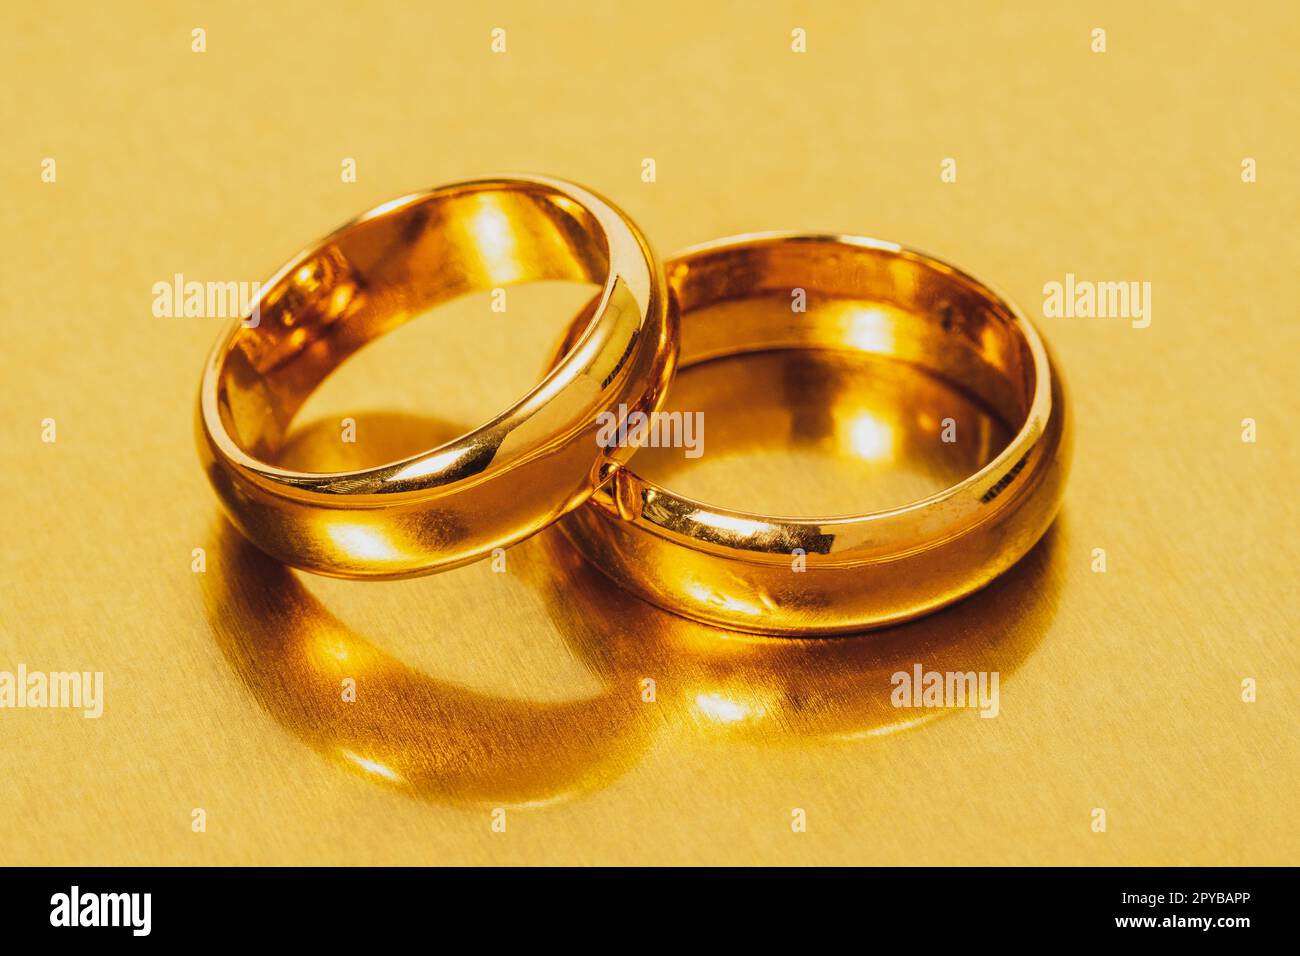 Gold wedding rings on a metal surface Stock Photo